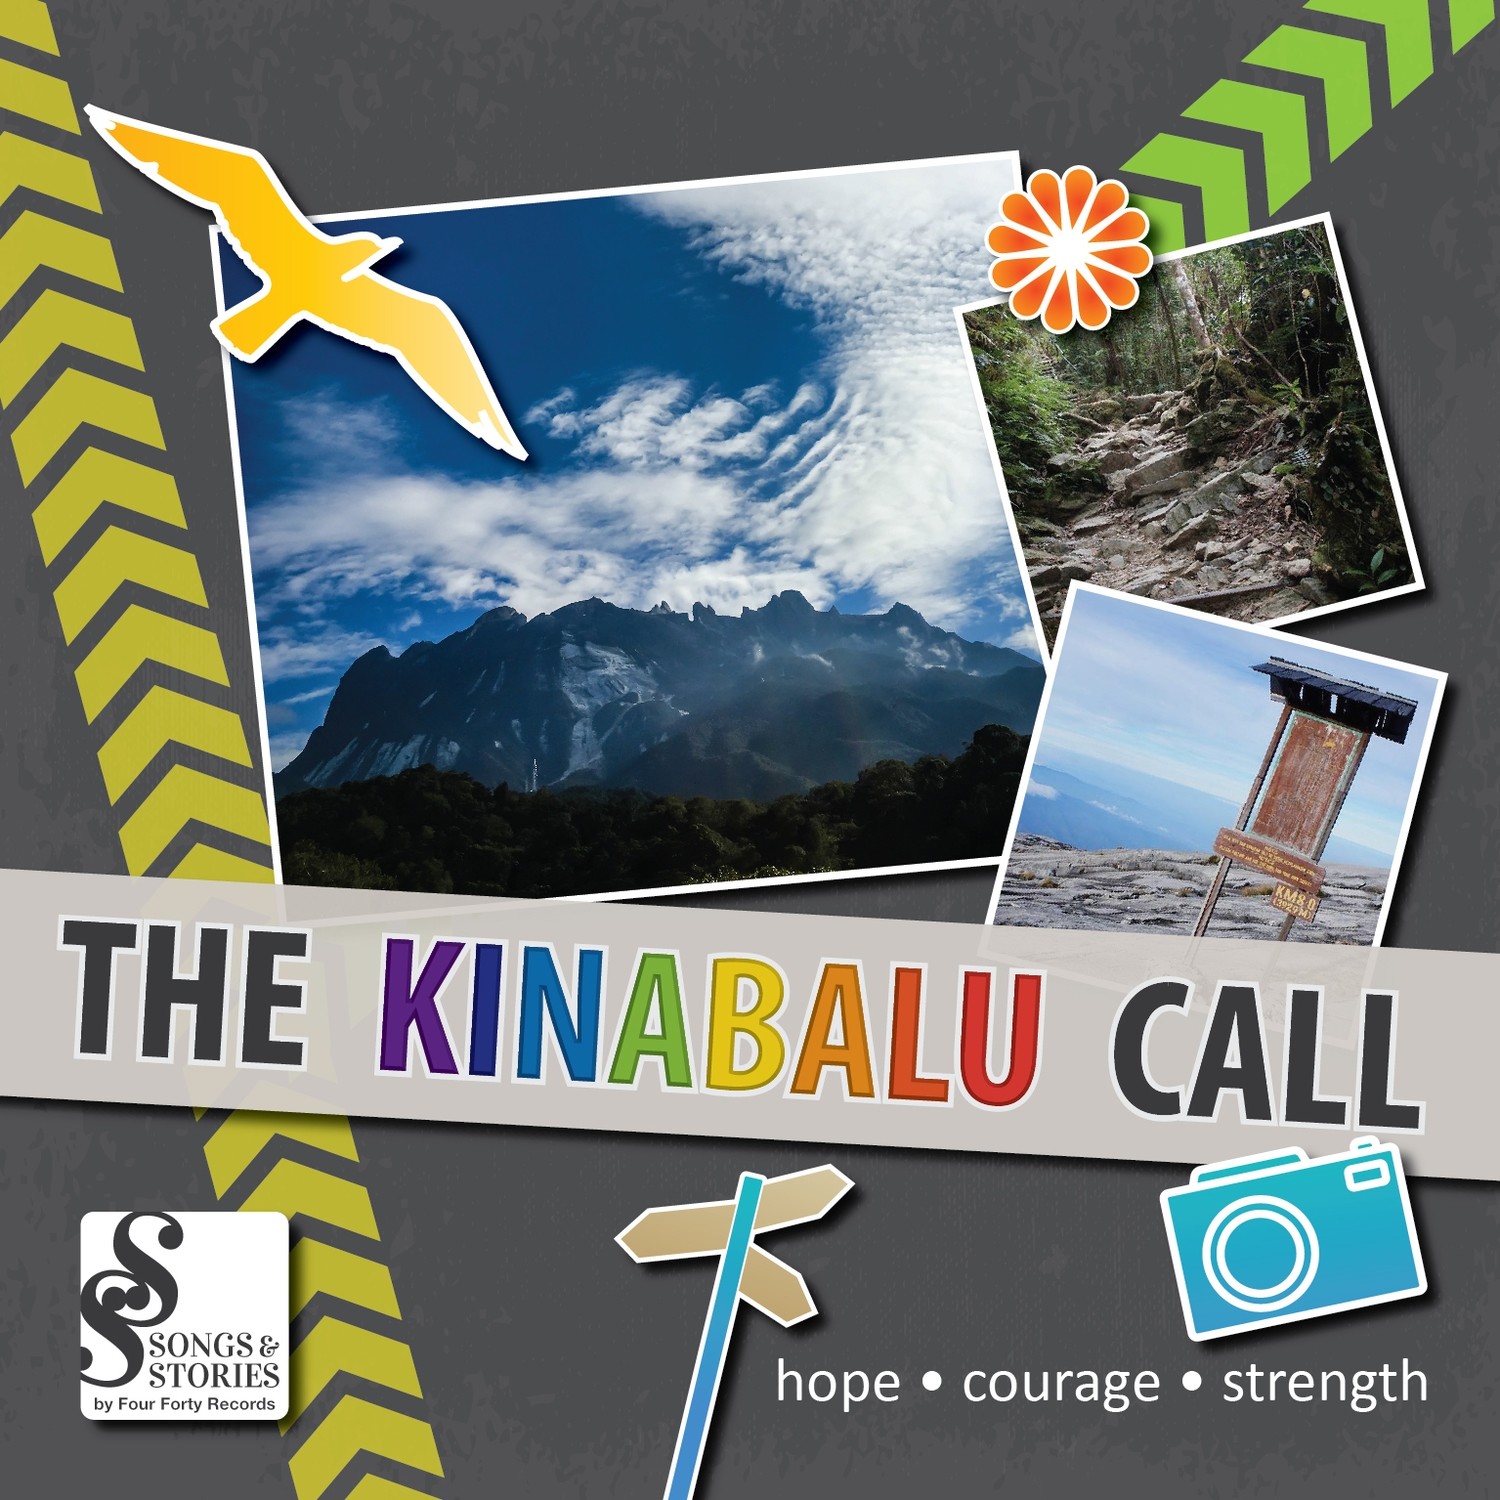 Songs & Stories: The Kinabalu Call - Inspirational Soundtrack & Story Booklet